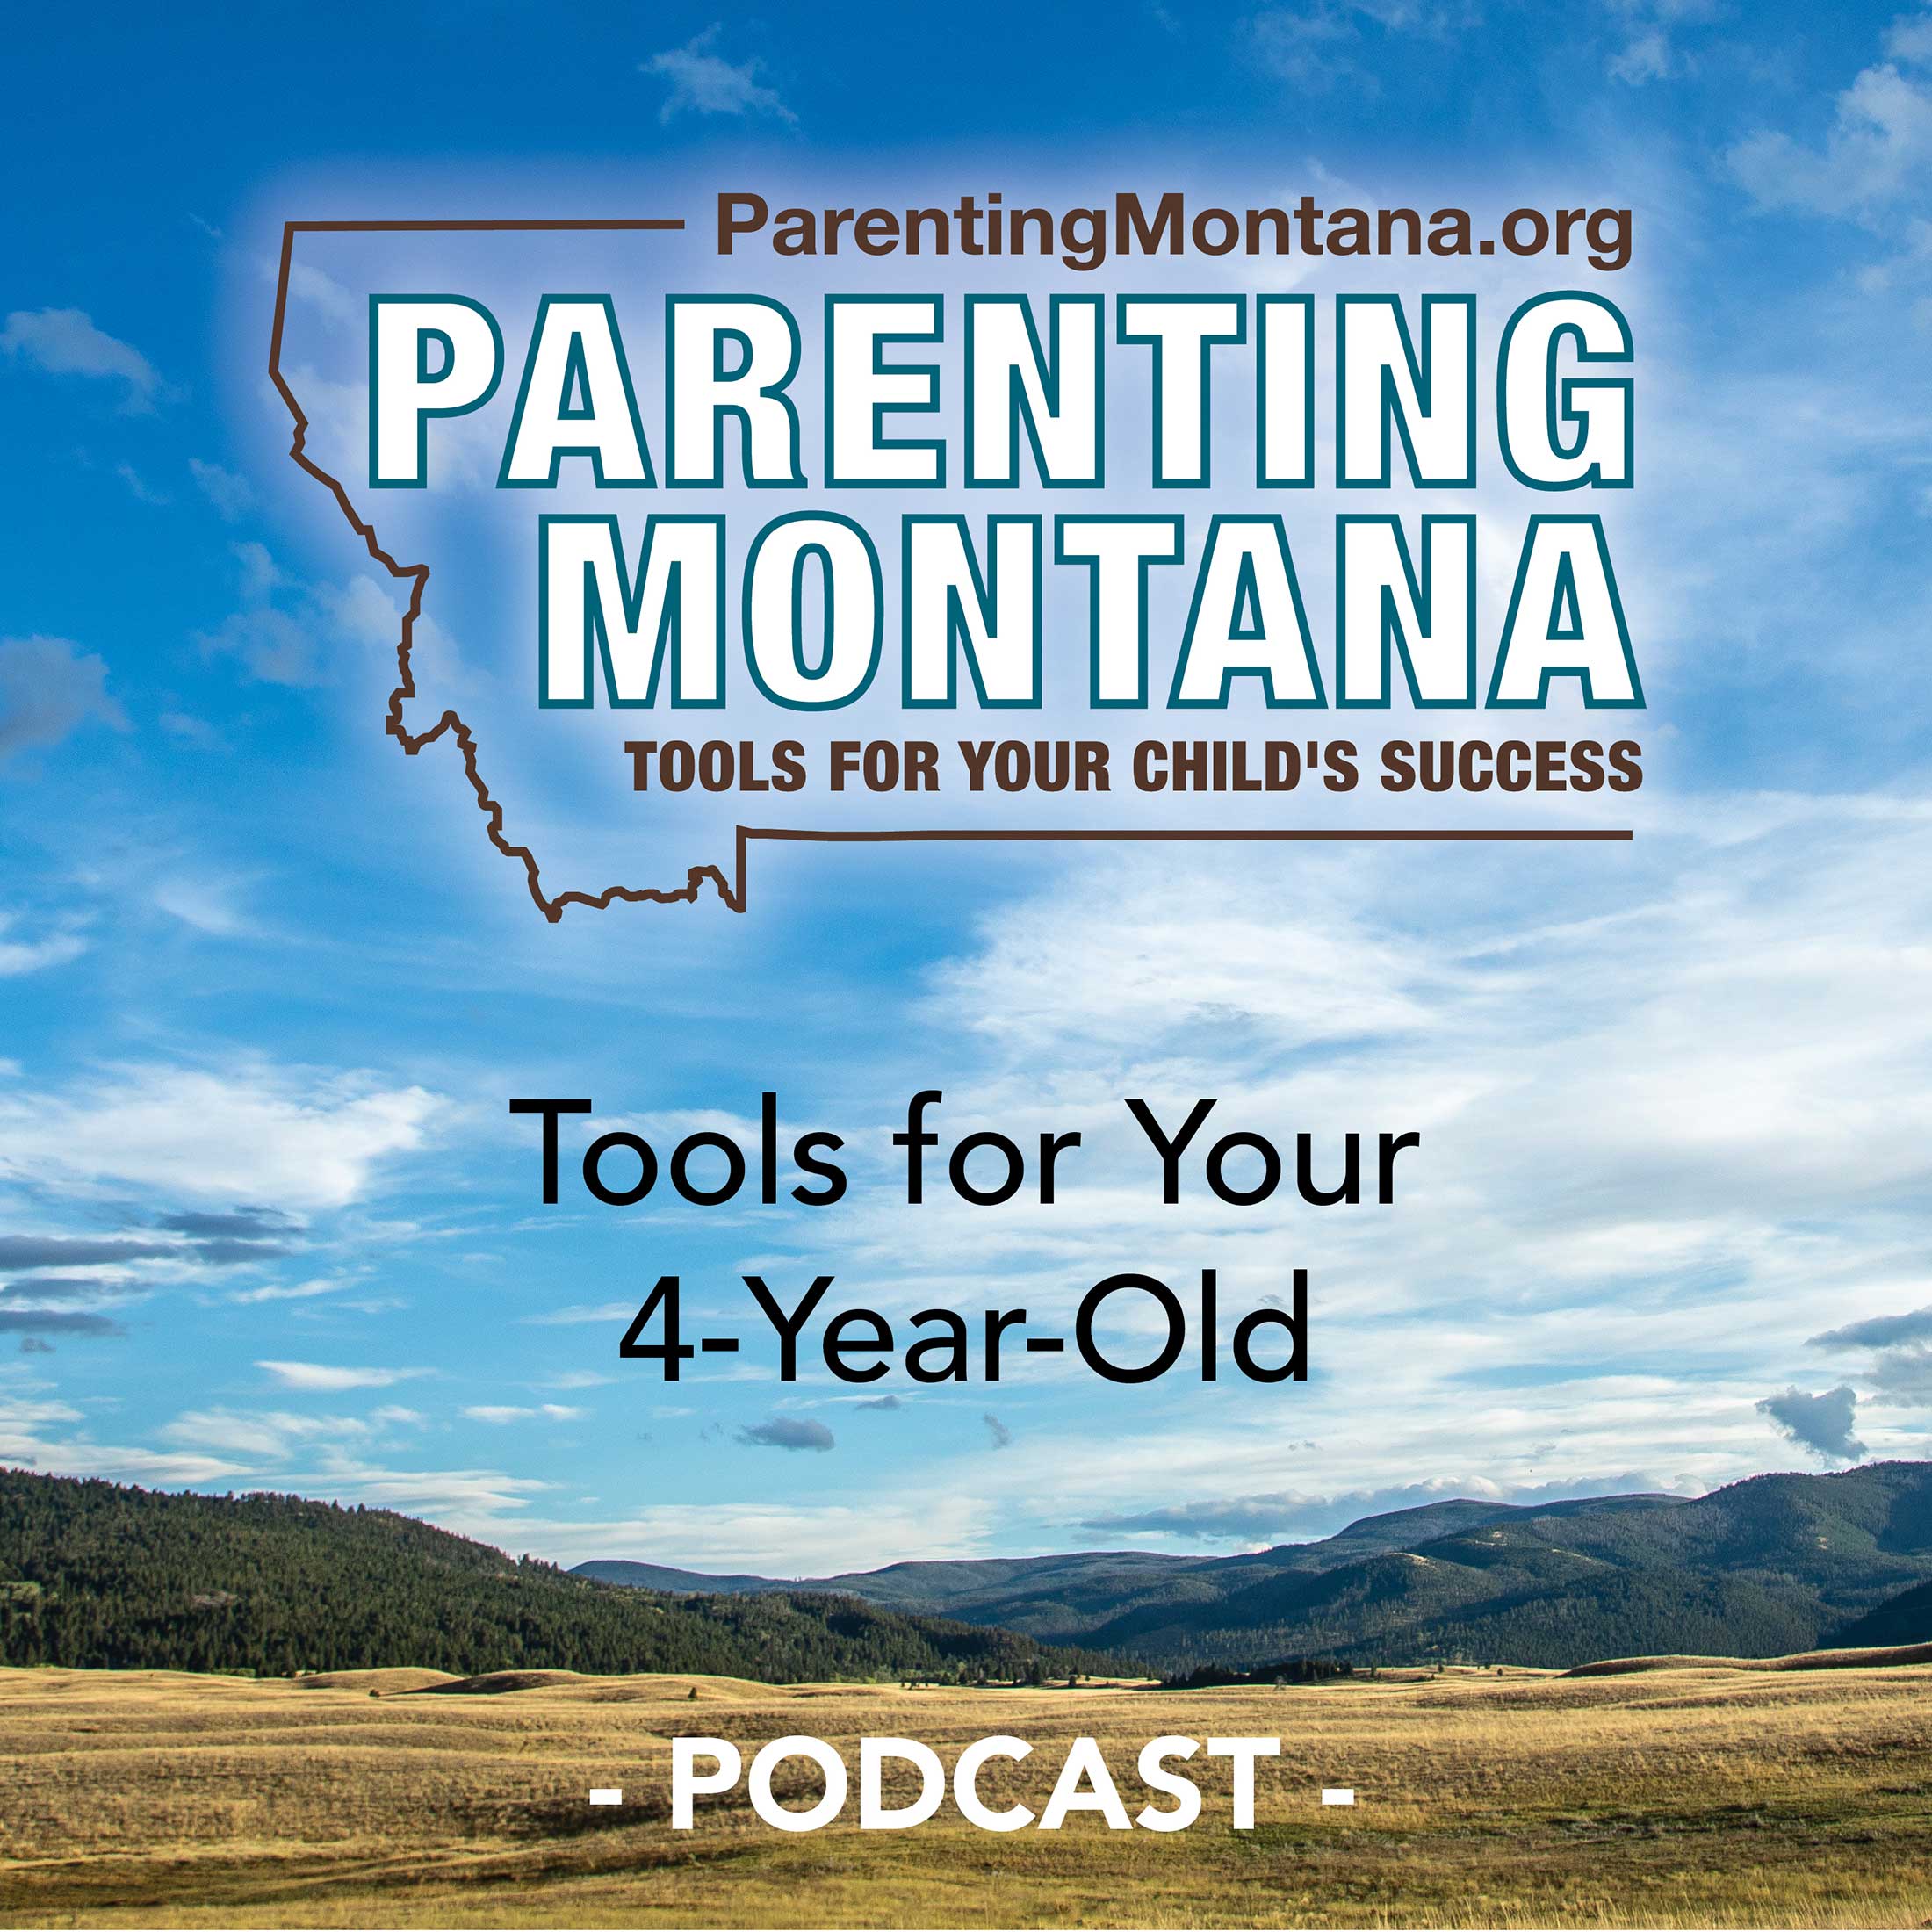 Artwork for podcast 4-Year-Old Parenting Montana Tools